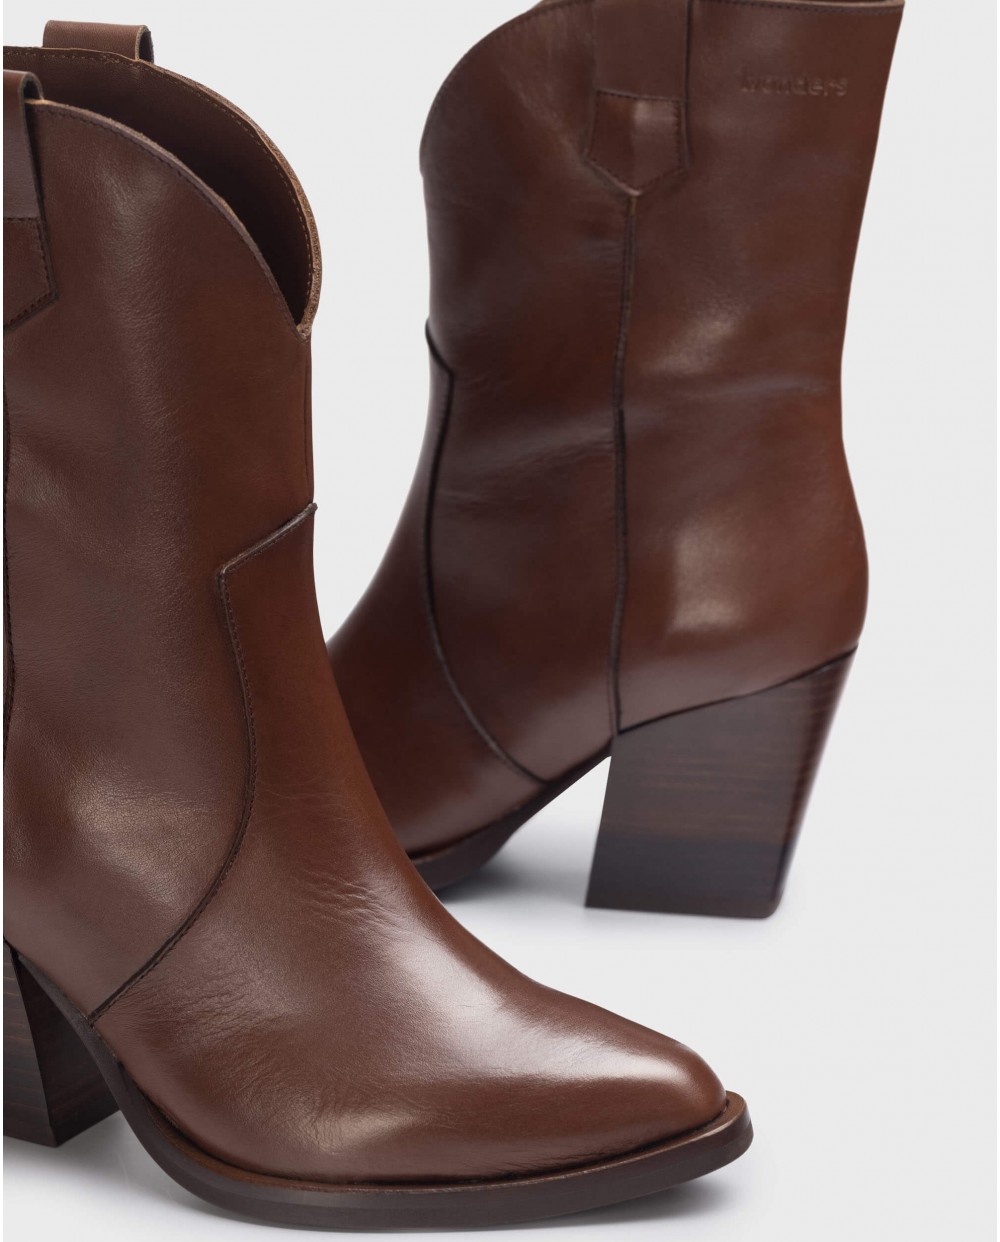 Wonders-Ankle Boots-Brown Paso ankle boot